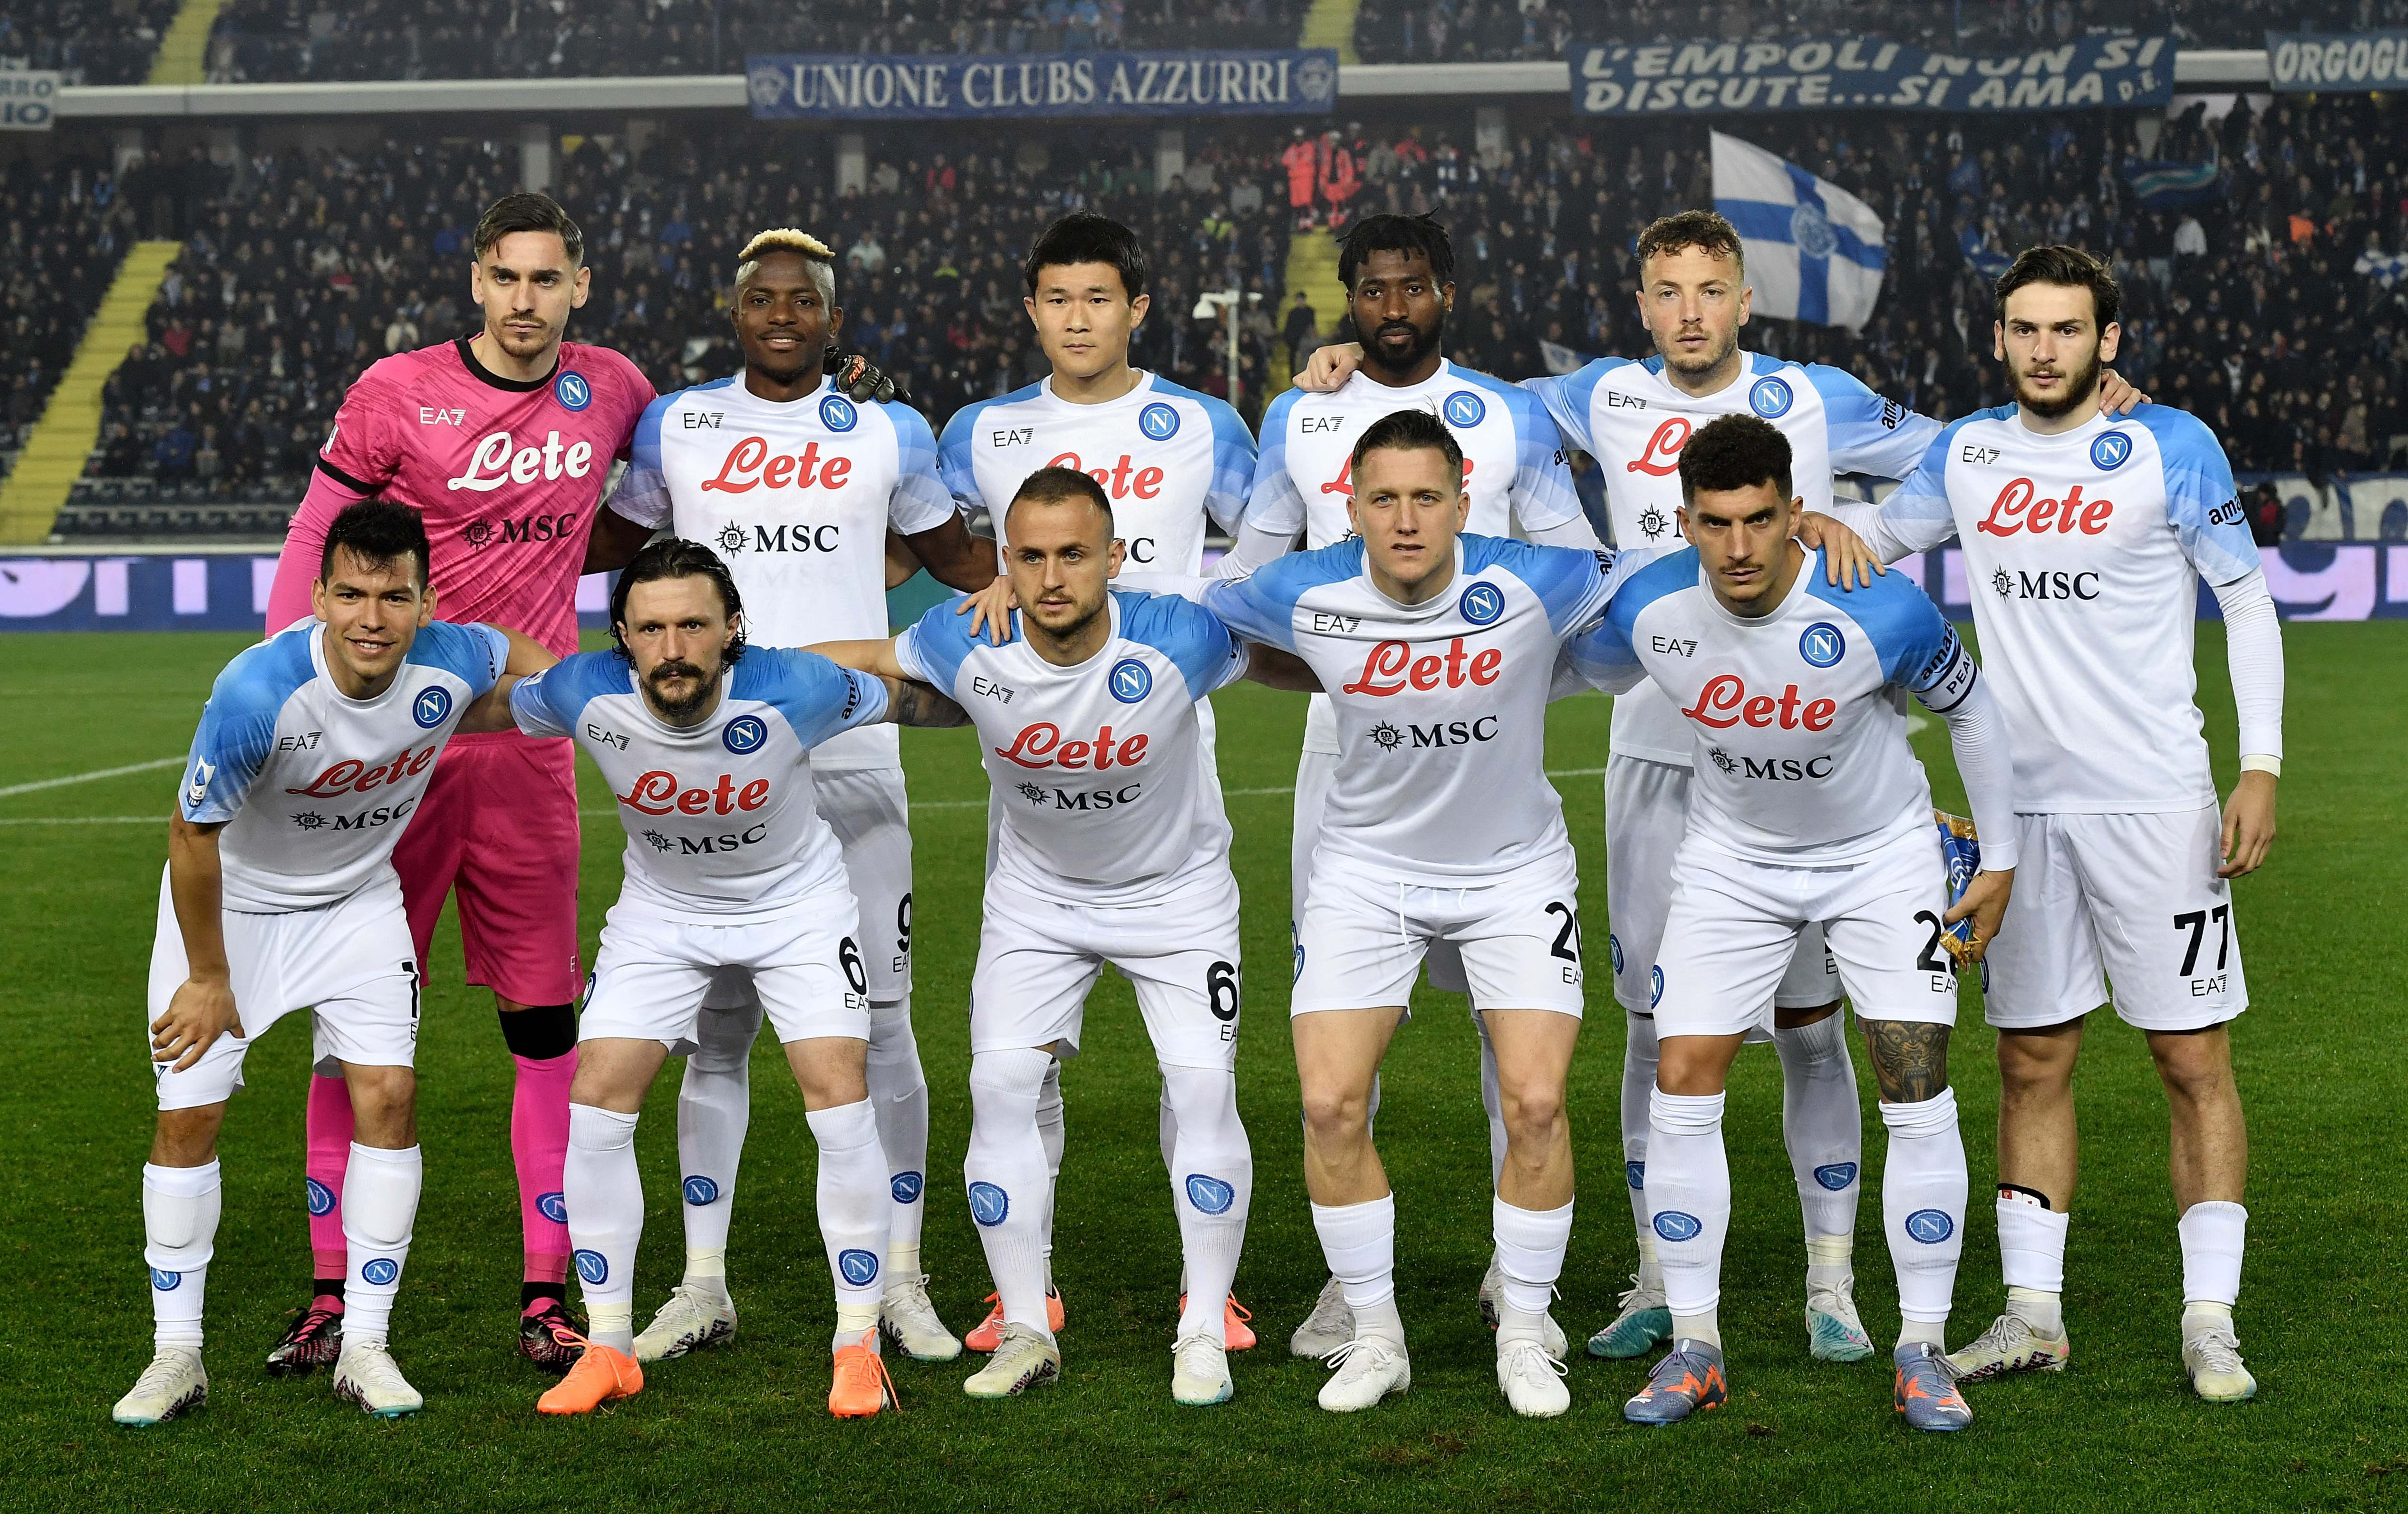 Napoli win Serie A title - Breaking down their squad construction